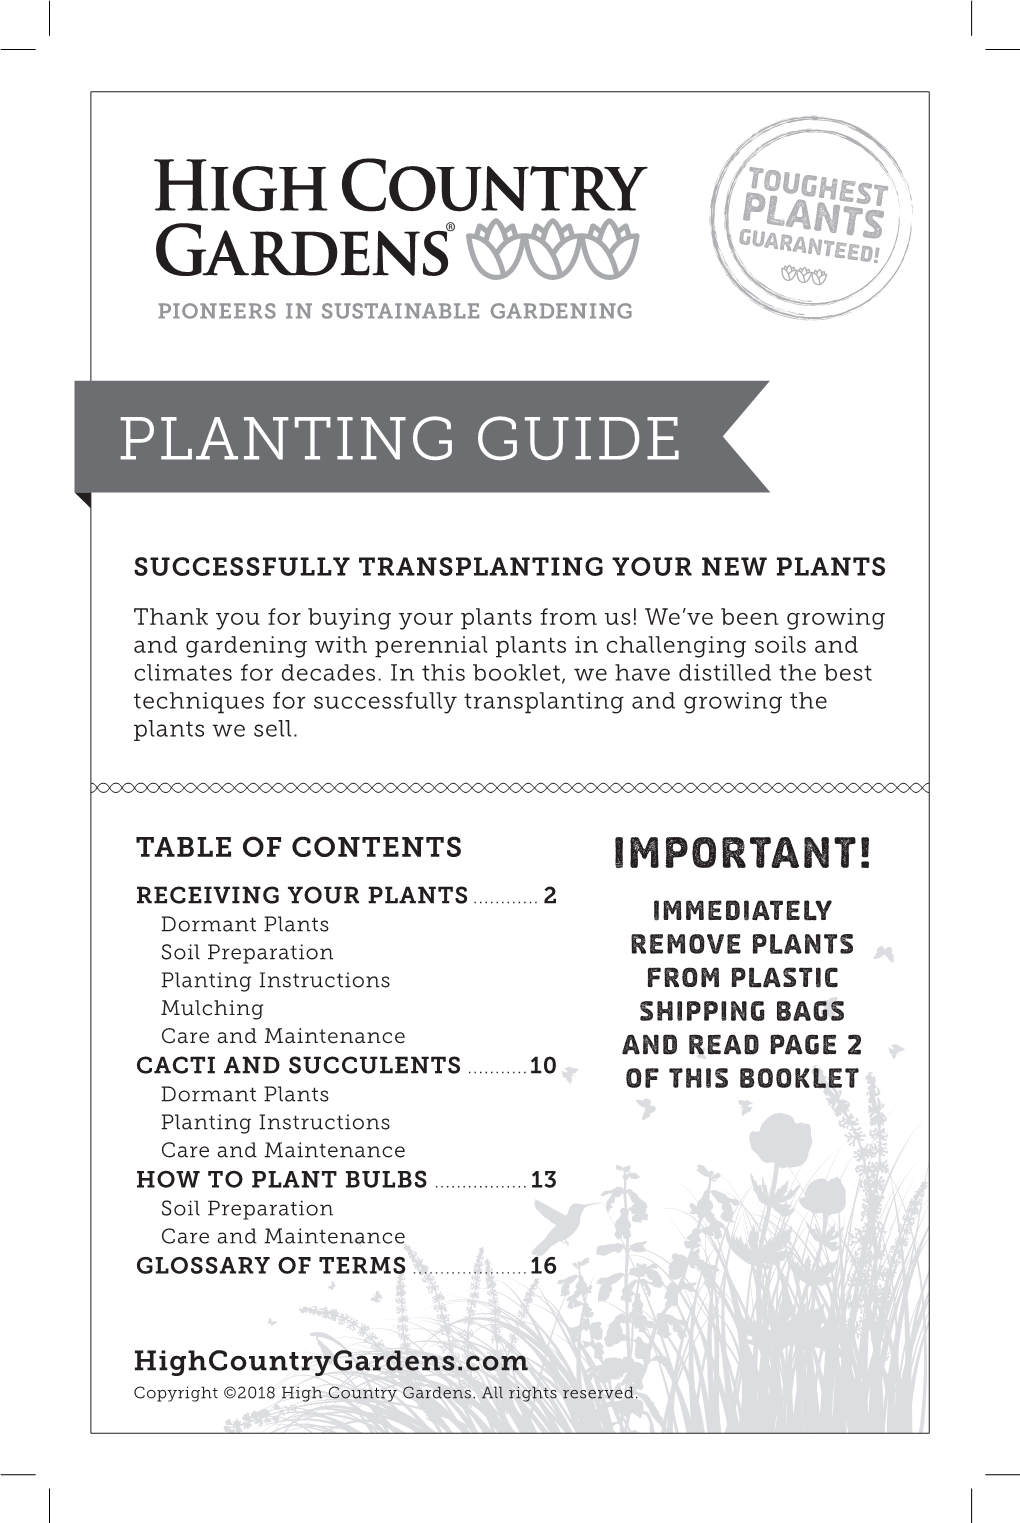 HCG Planting Guide 2018 Update